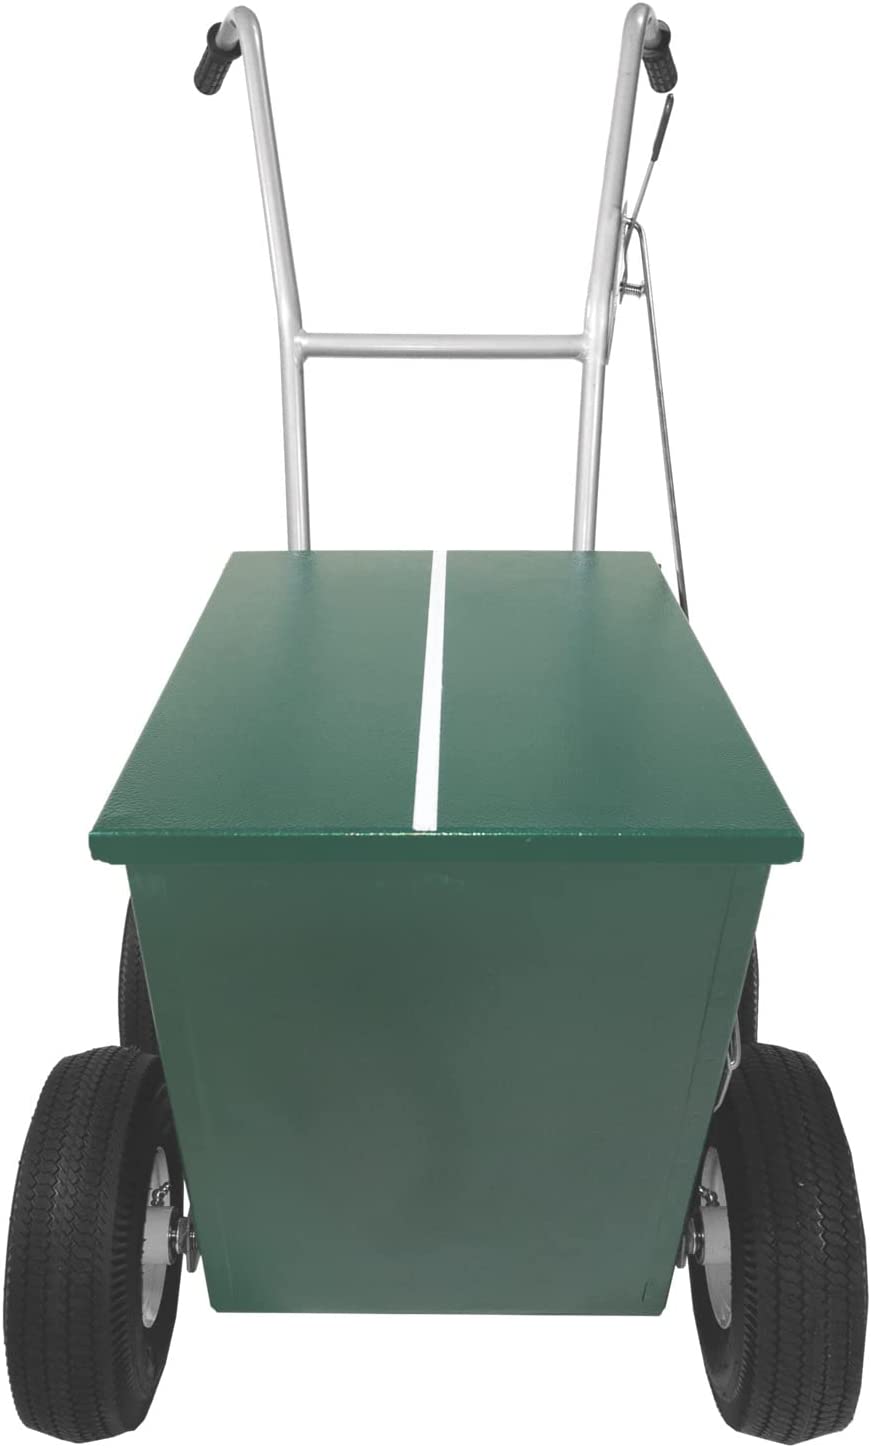 Champion Sports Wheeled Dry Line Athletic Field Marker, 100 lb Capacity, Green  - $169